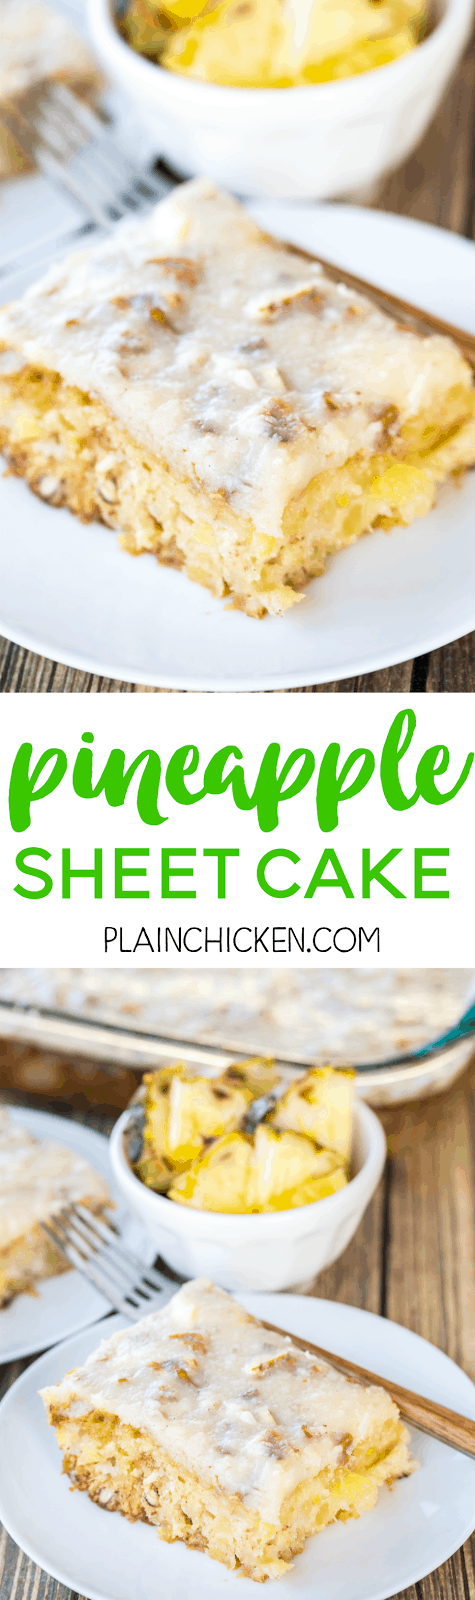 Pineapple Sheet Cake - seriously delicious! Easy pineapple cake with a delicious cream cheese frosting! Sugar, flour, baking soda, vanilla, crushed pineapple, pecans, butter, cream cheese. Great for cookouts and potlucks. Can make ahead of time and refrigerate until ready to serve.